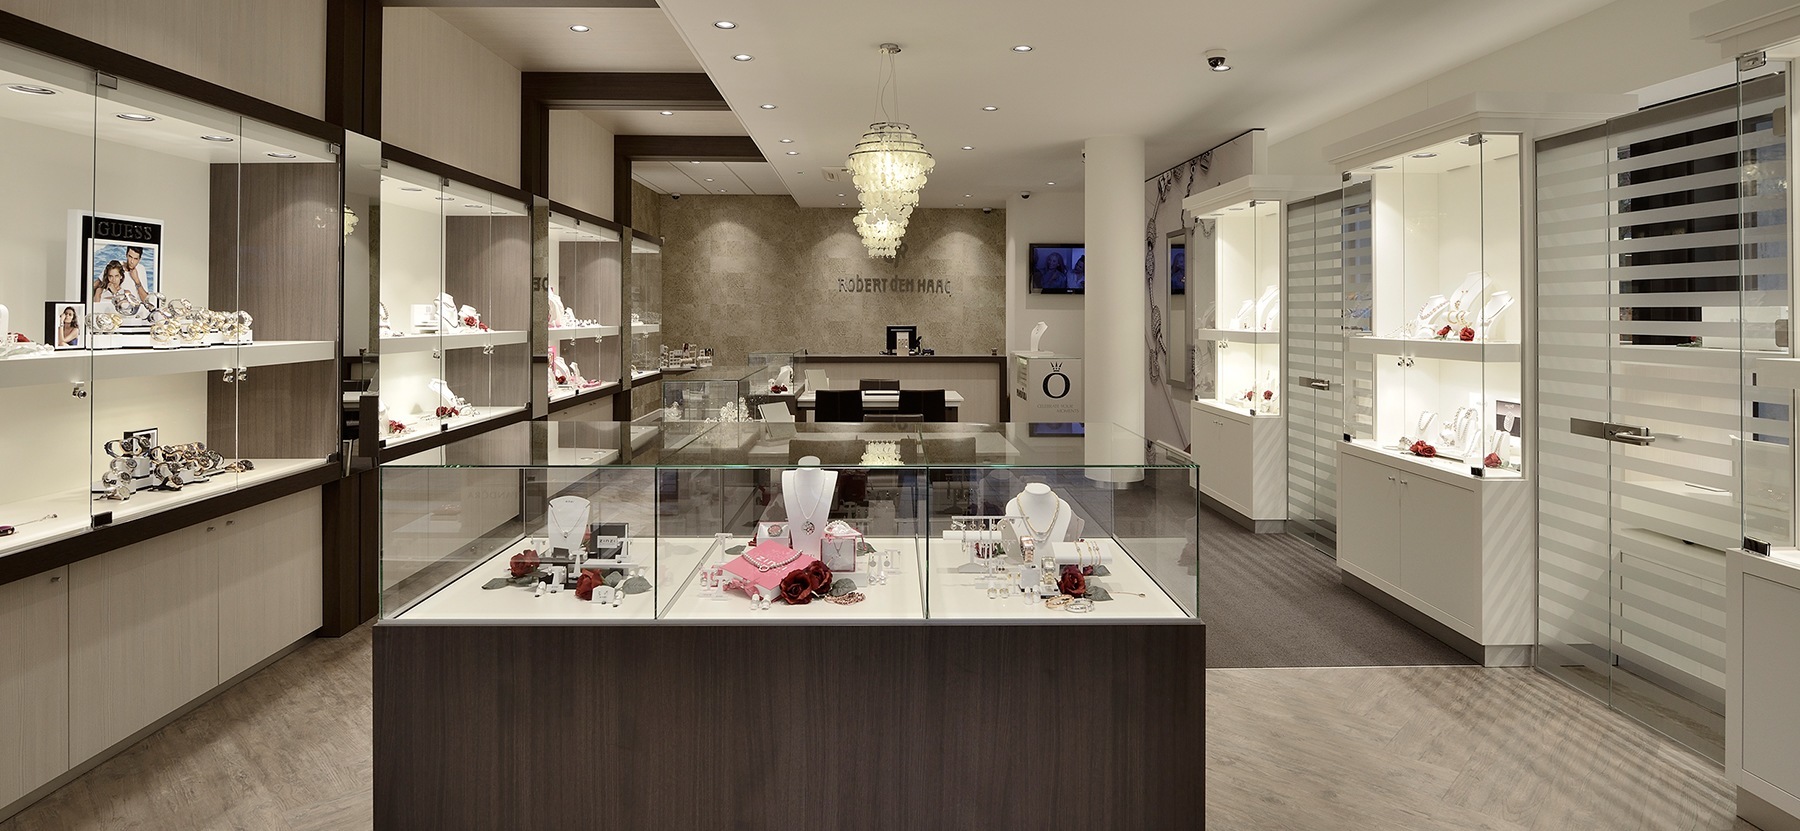 Shop fitting secure jewelry store Robert den Haag by WSB - 